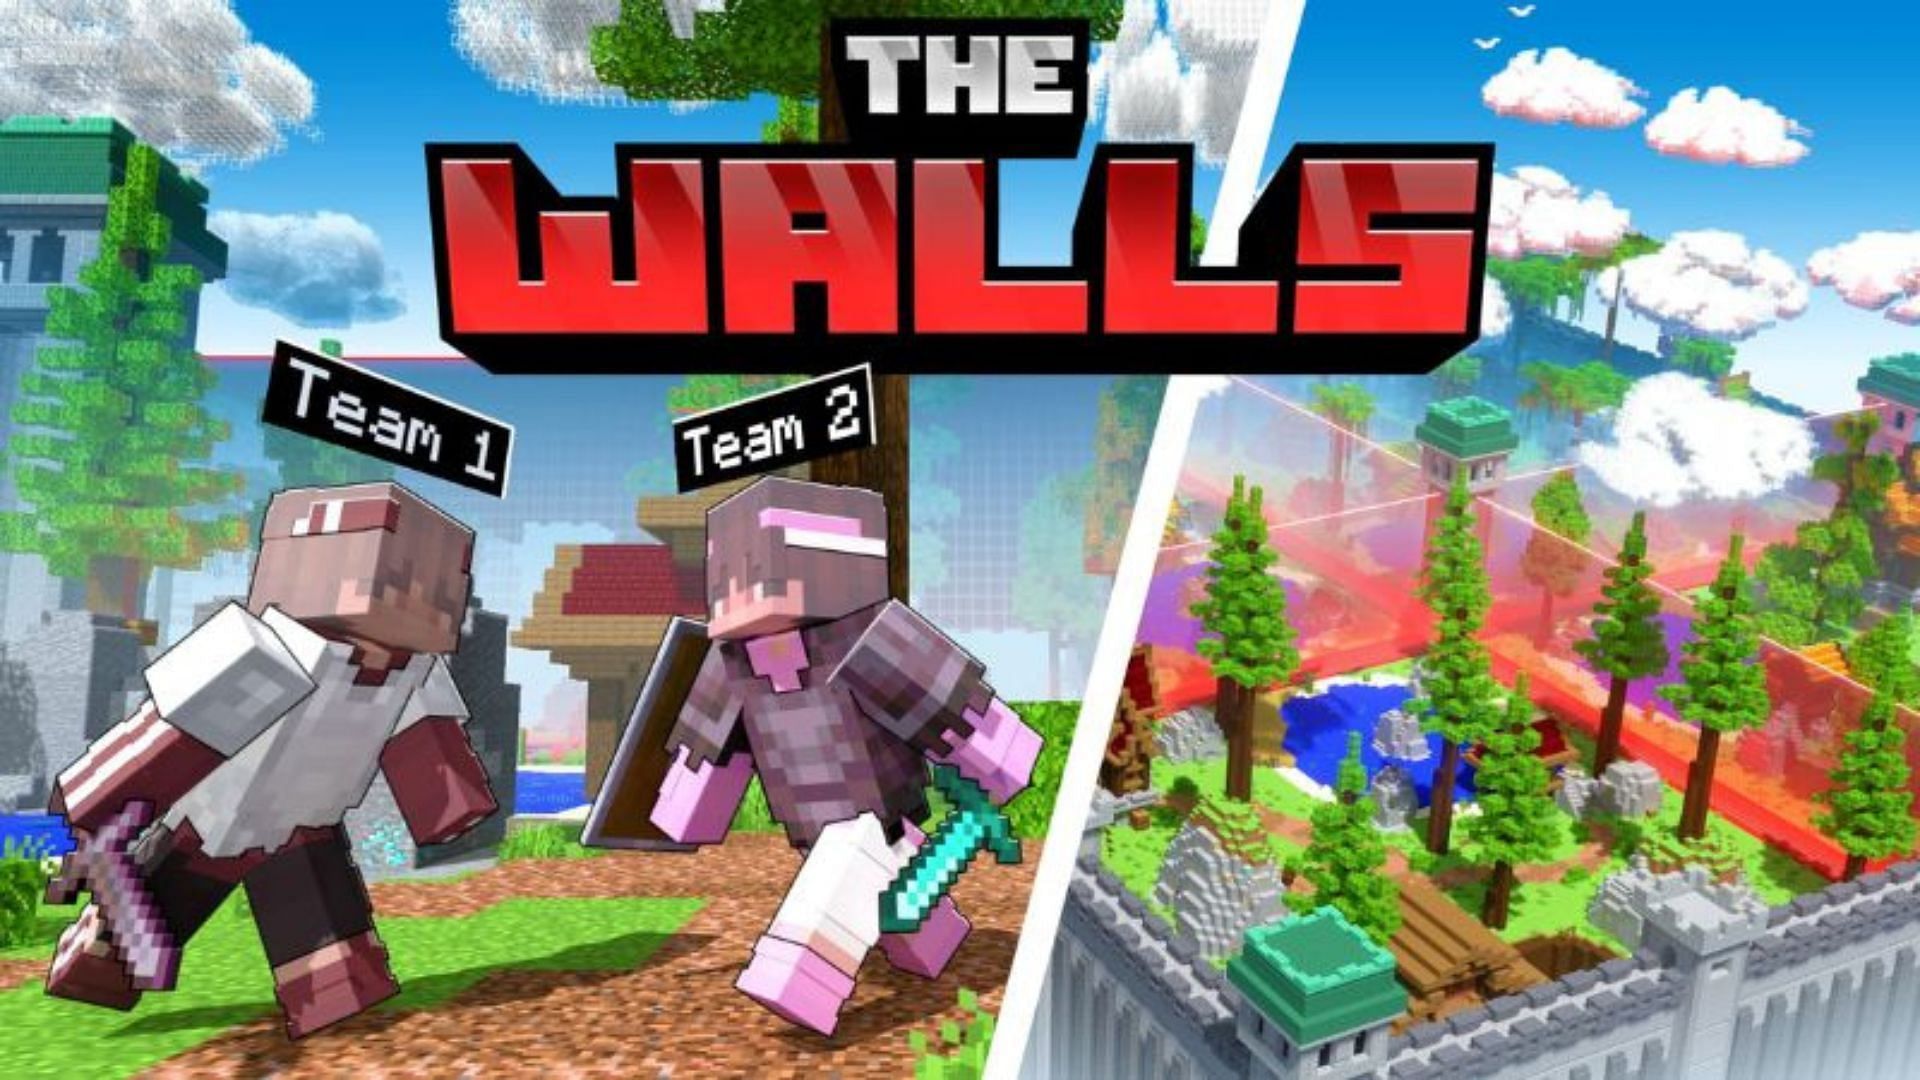 The Walls mini-game in Minecraft Marketplace (Image via Minecraft Marketplace)